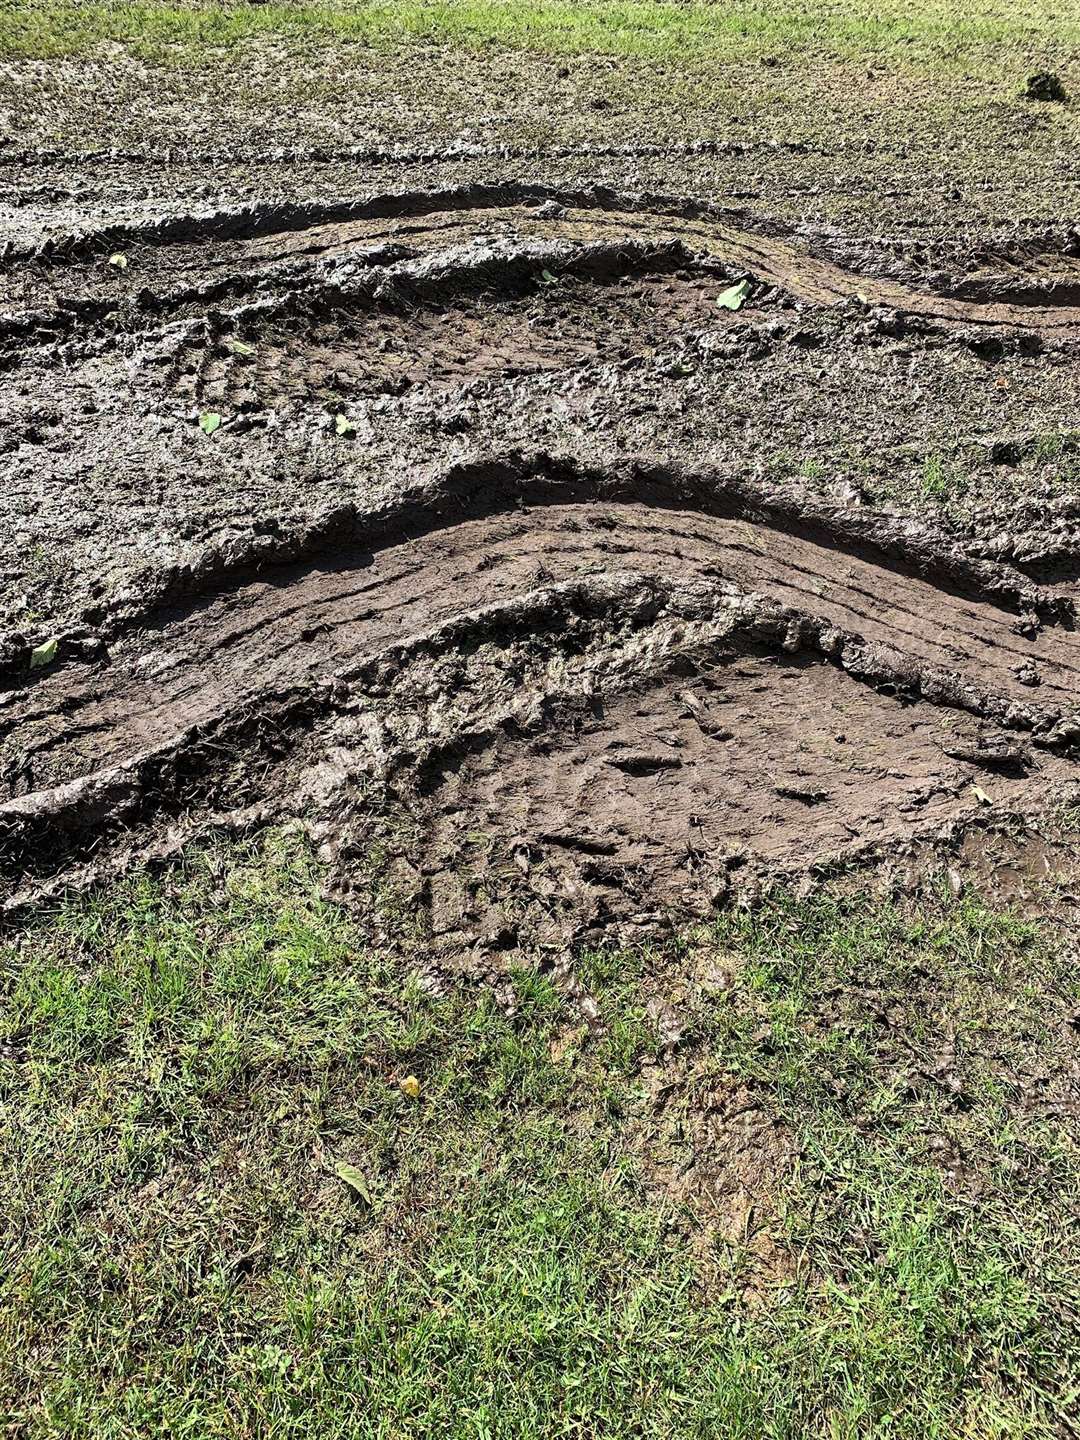 A close-up of a damaged section of turf.